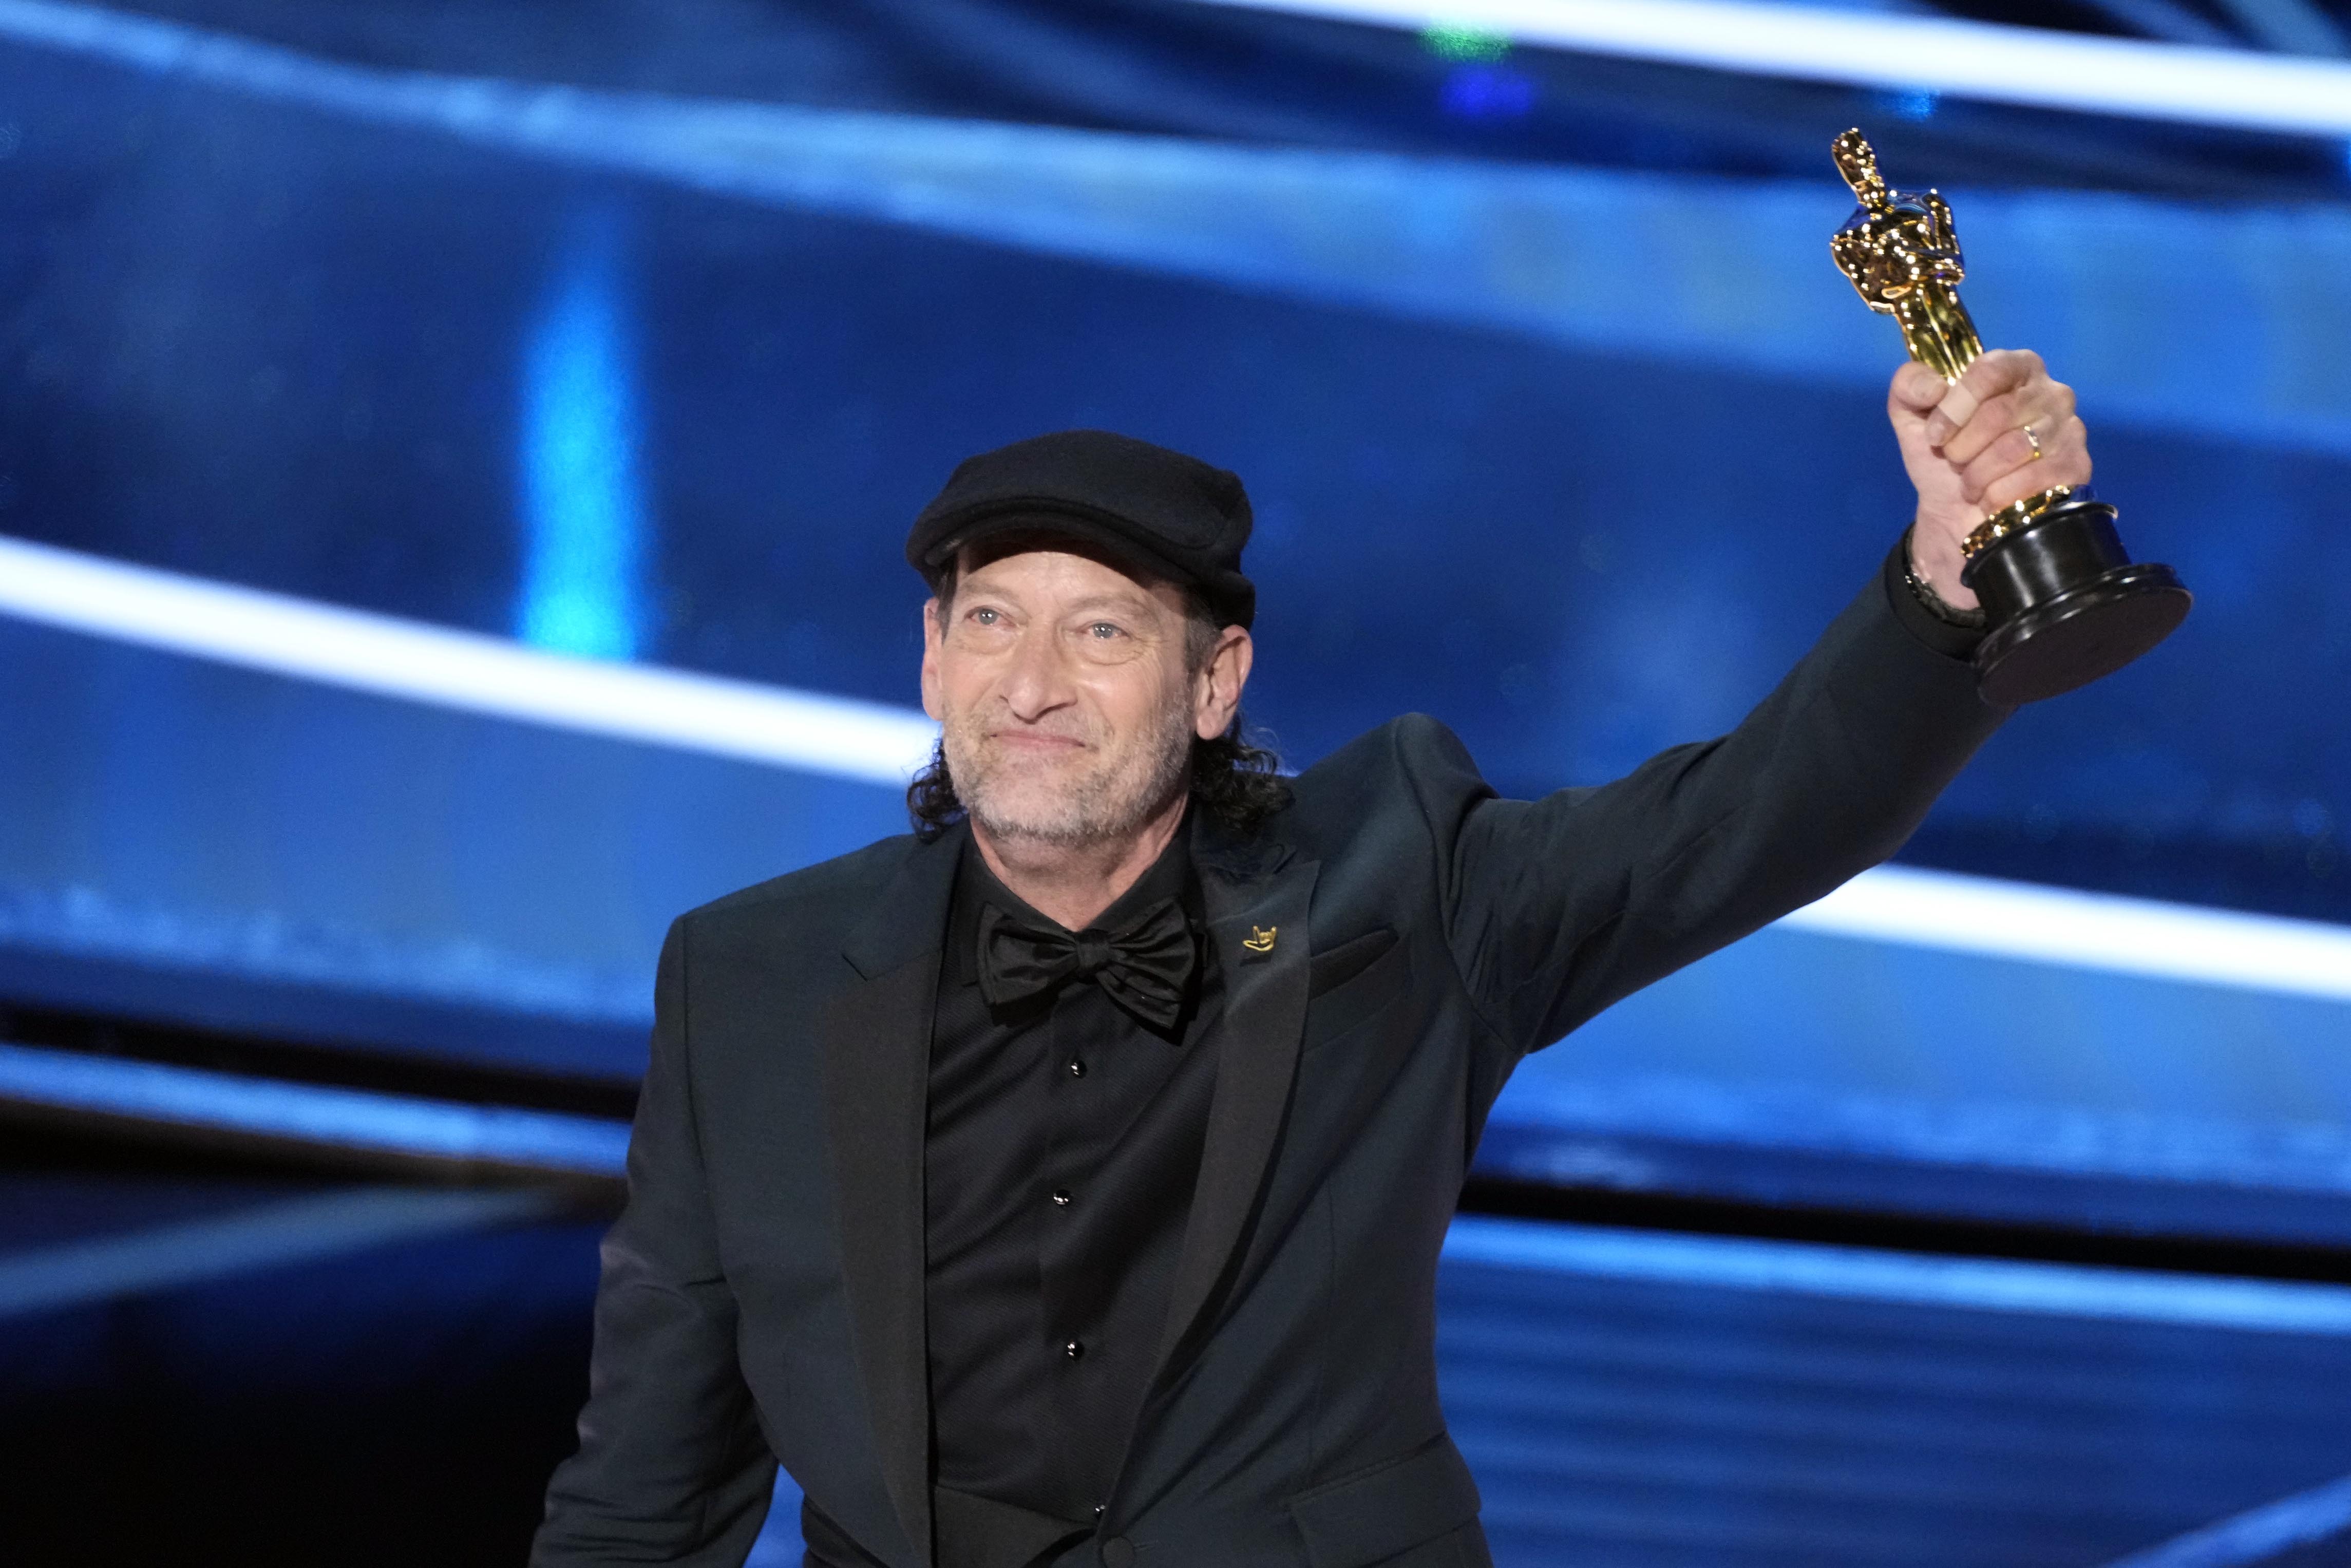 Troy Kotsur accepts the award for best actor in a supporting role for his performance in ”CODA” during the 94th Academy Awards at the Dolby Theatre.